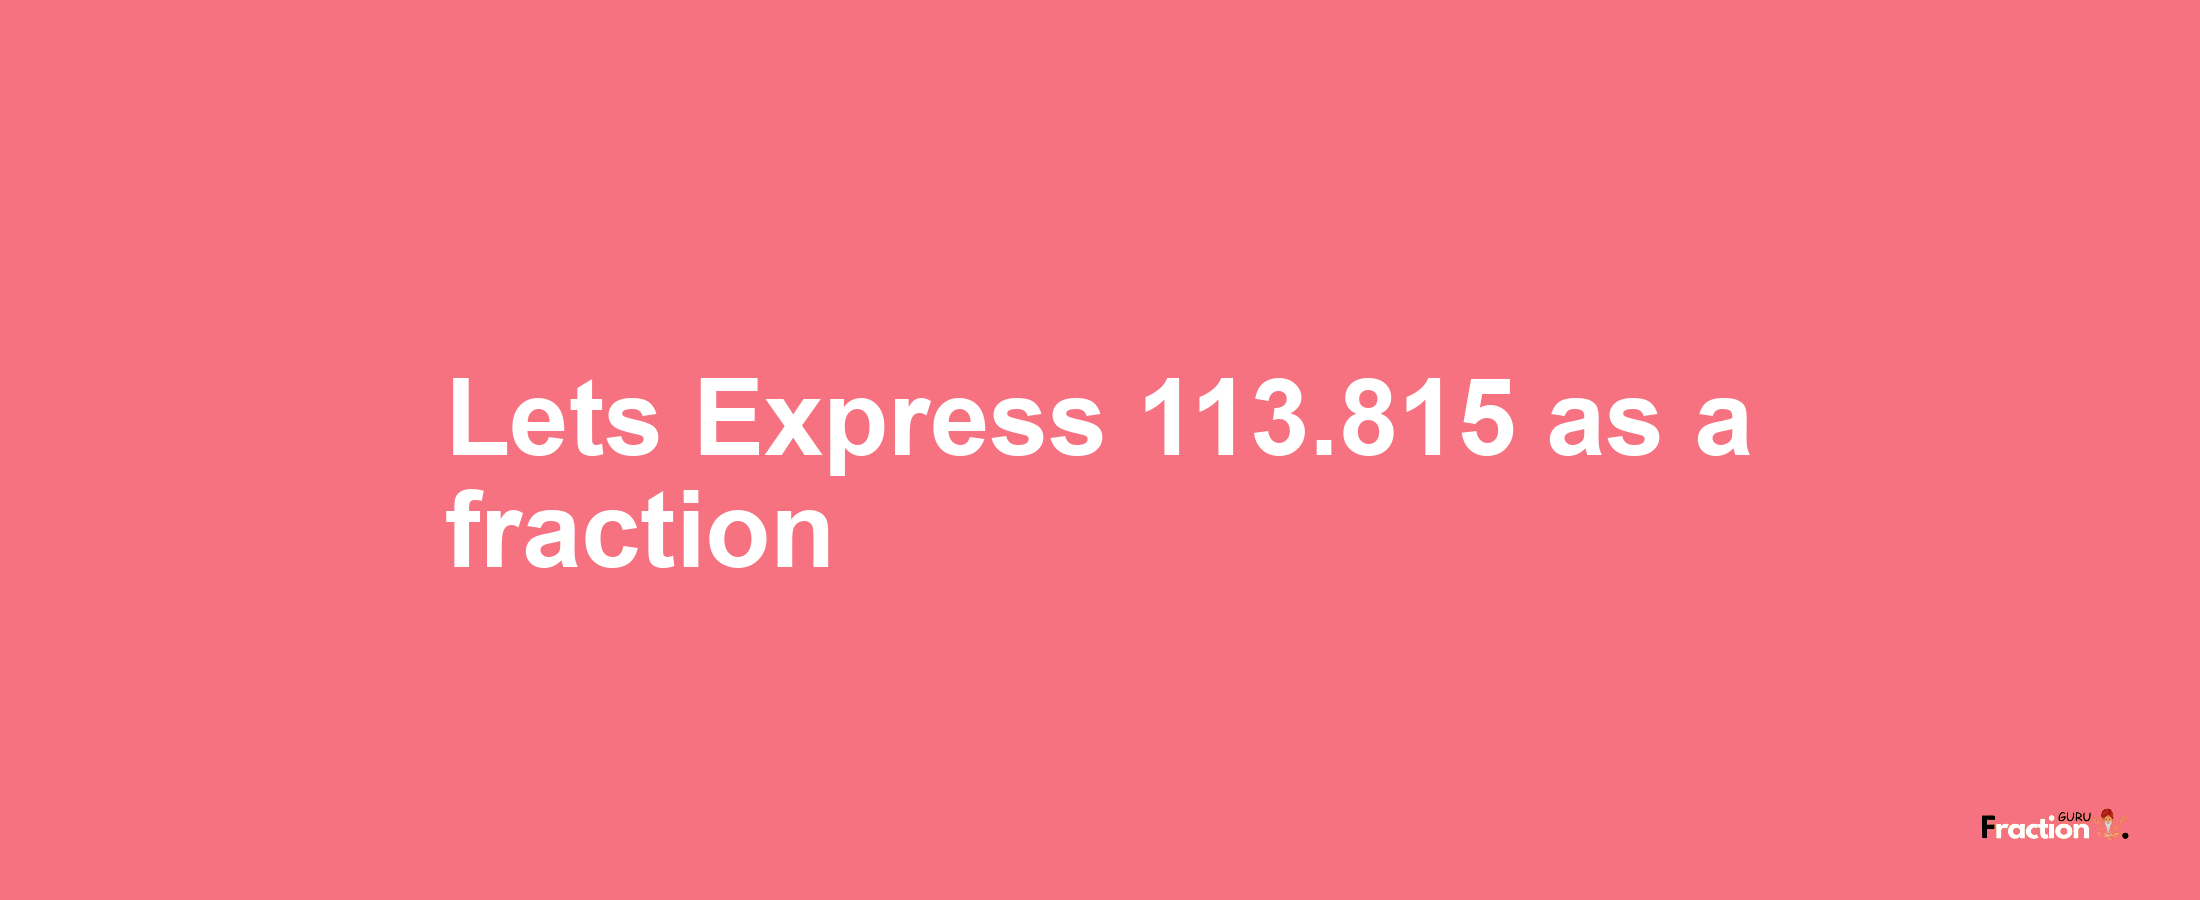 Lets Express 113.815 as afraction